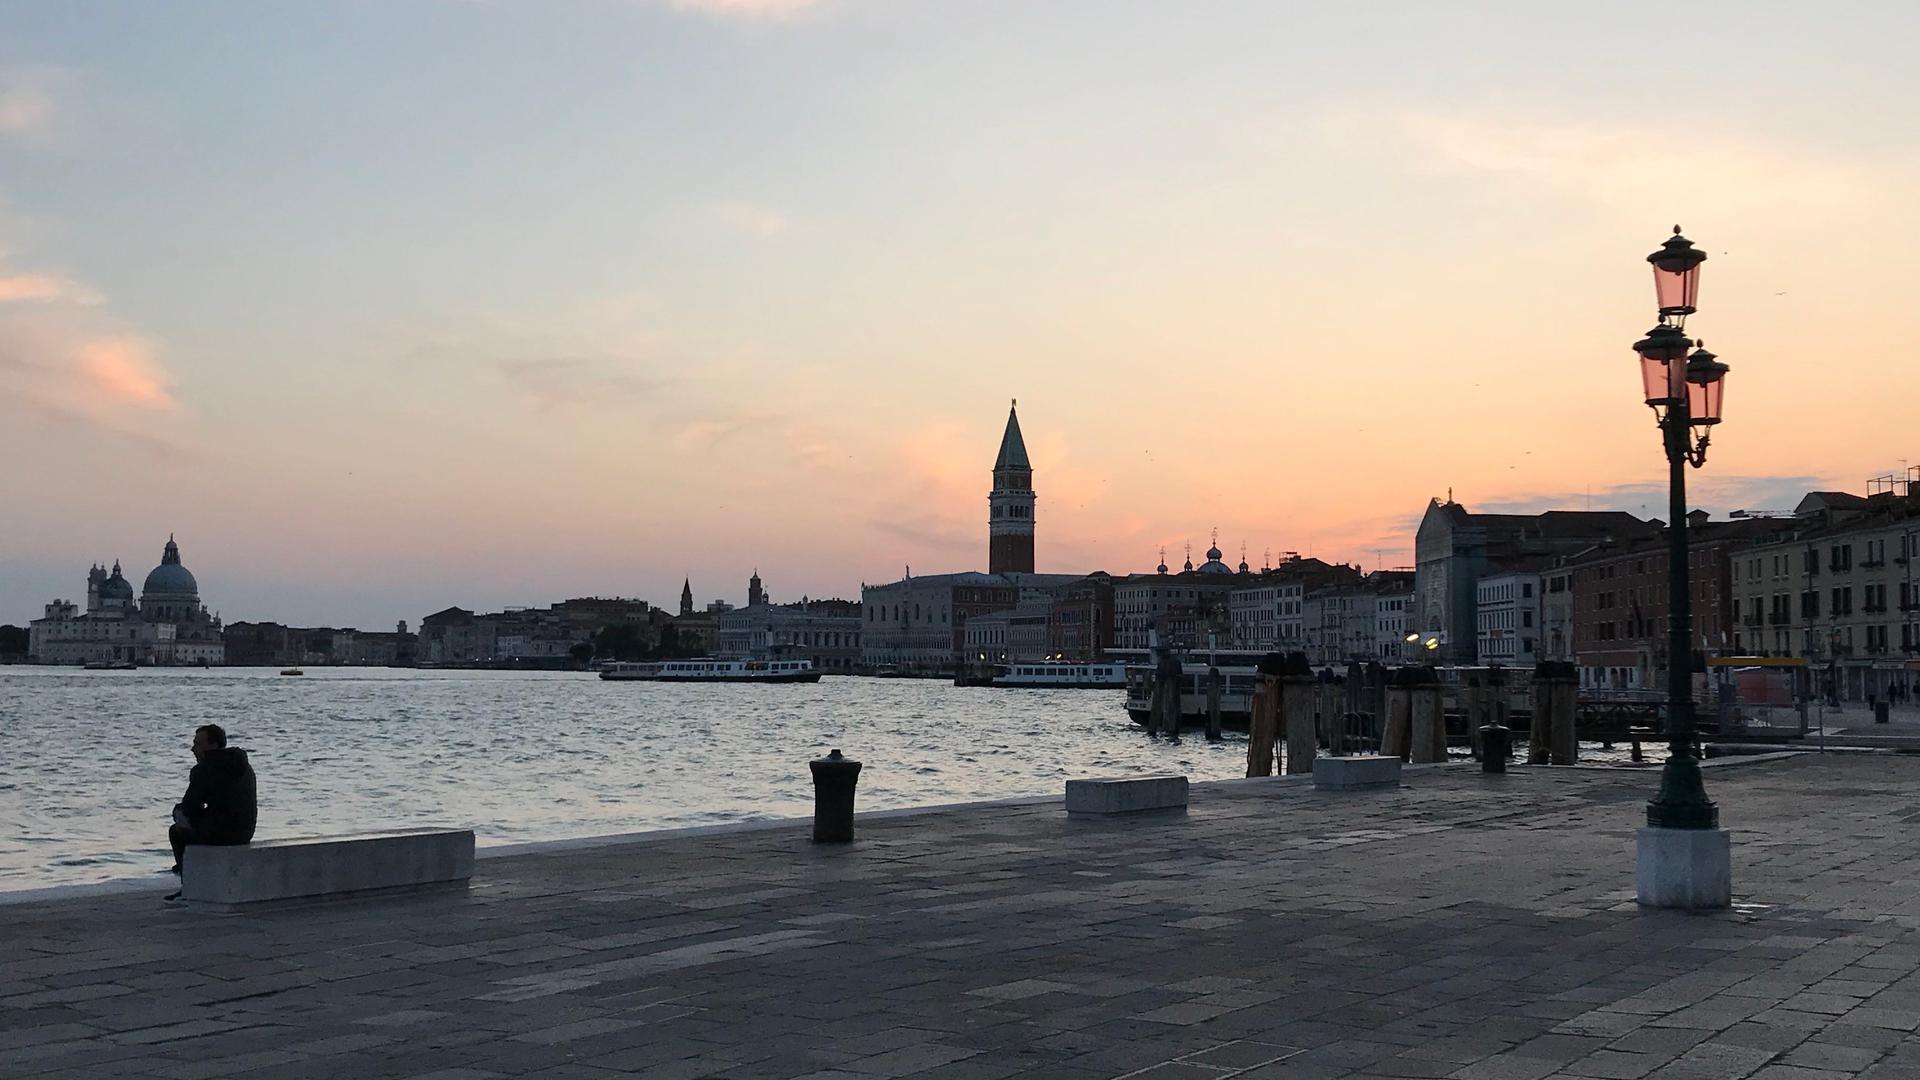 The San Marco basin in Venice appears placid as a result of the slowdown in activity with the country's lockdown in response to the coronavirus.